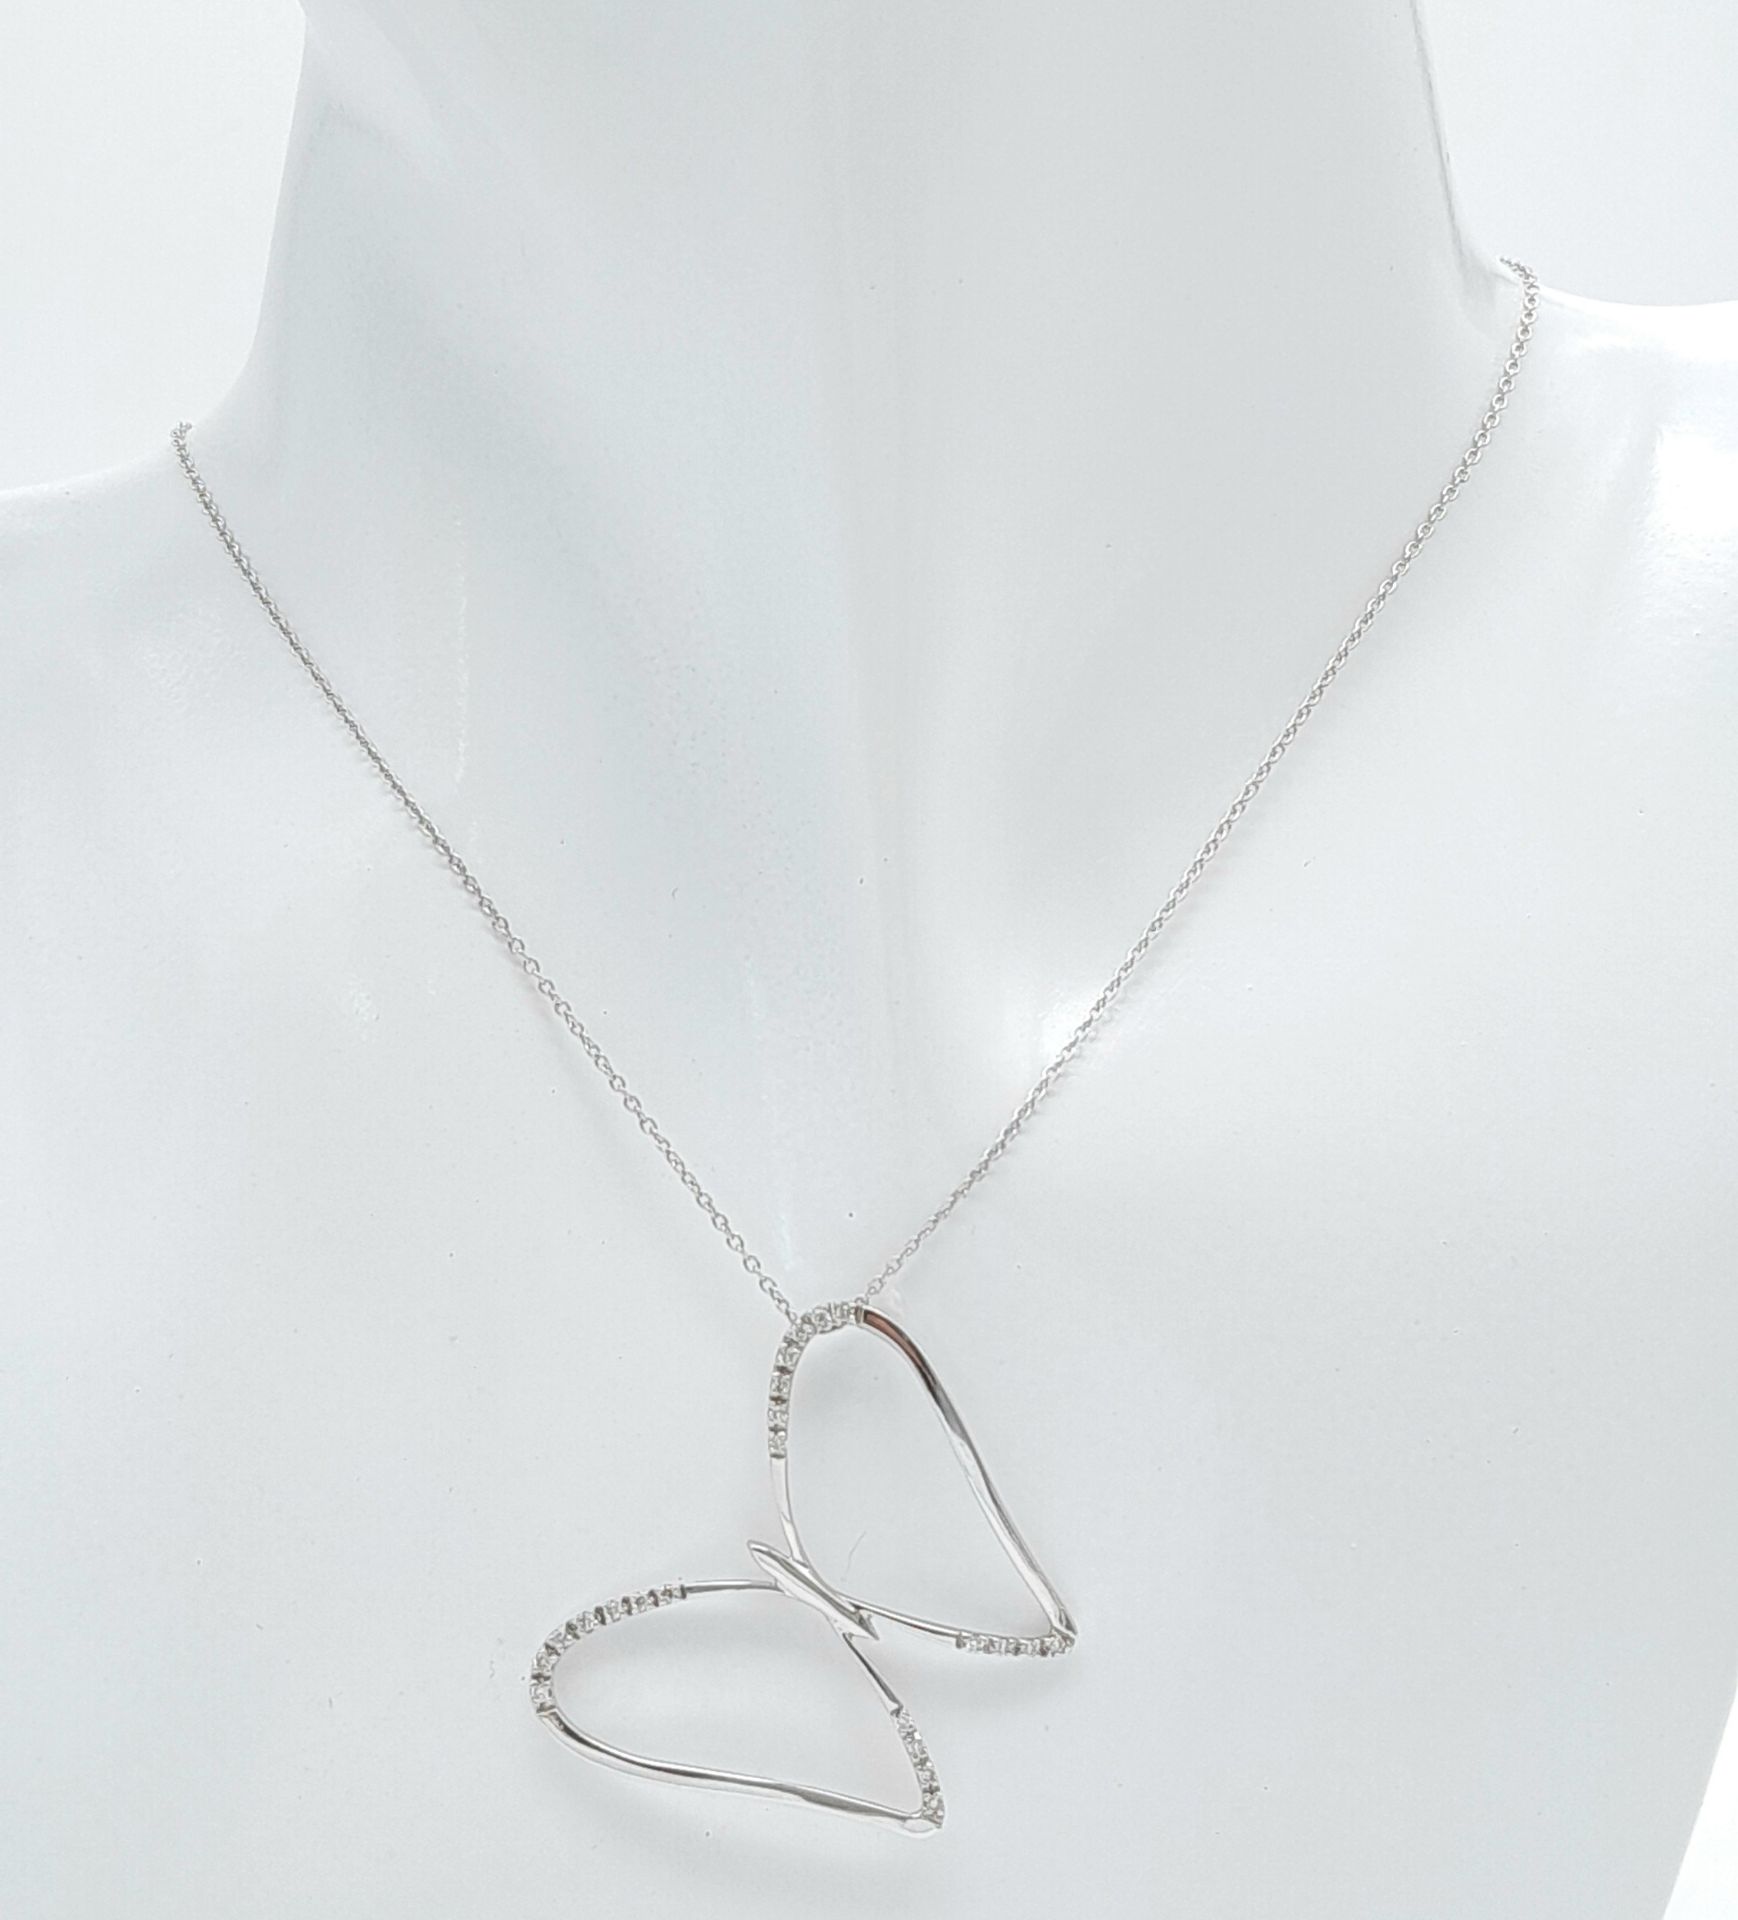 A 18ct White Gold Diamond Butterfly Necklace, 0.08ct diamond, 16” length, 4.6g weight, approx 32mm x